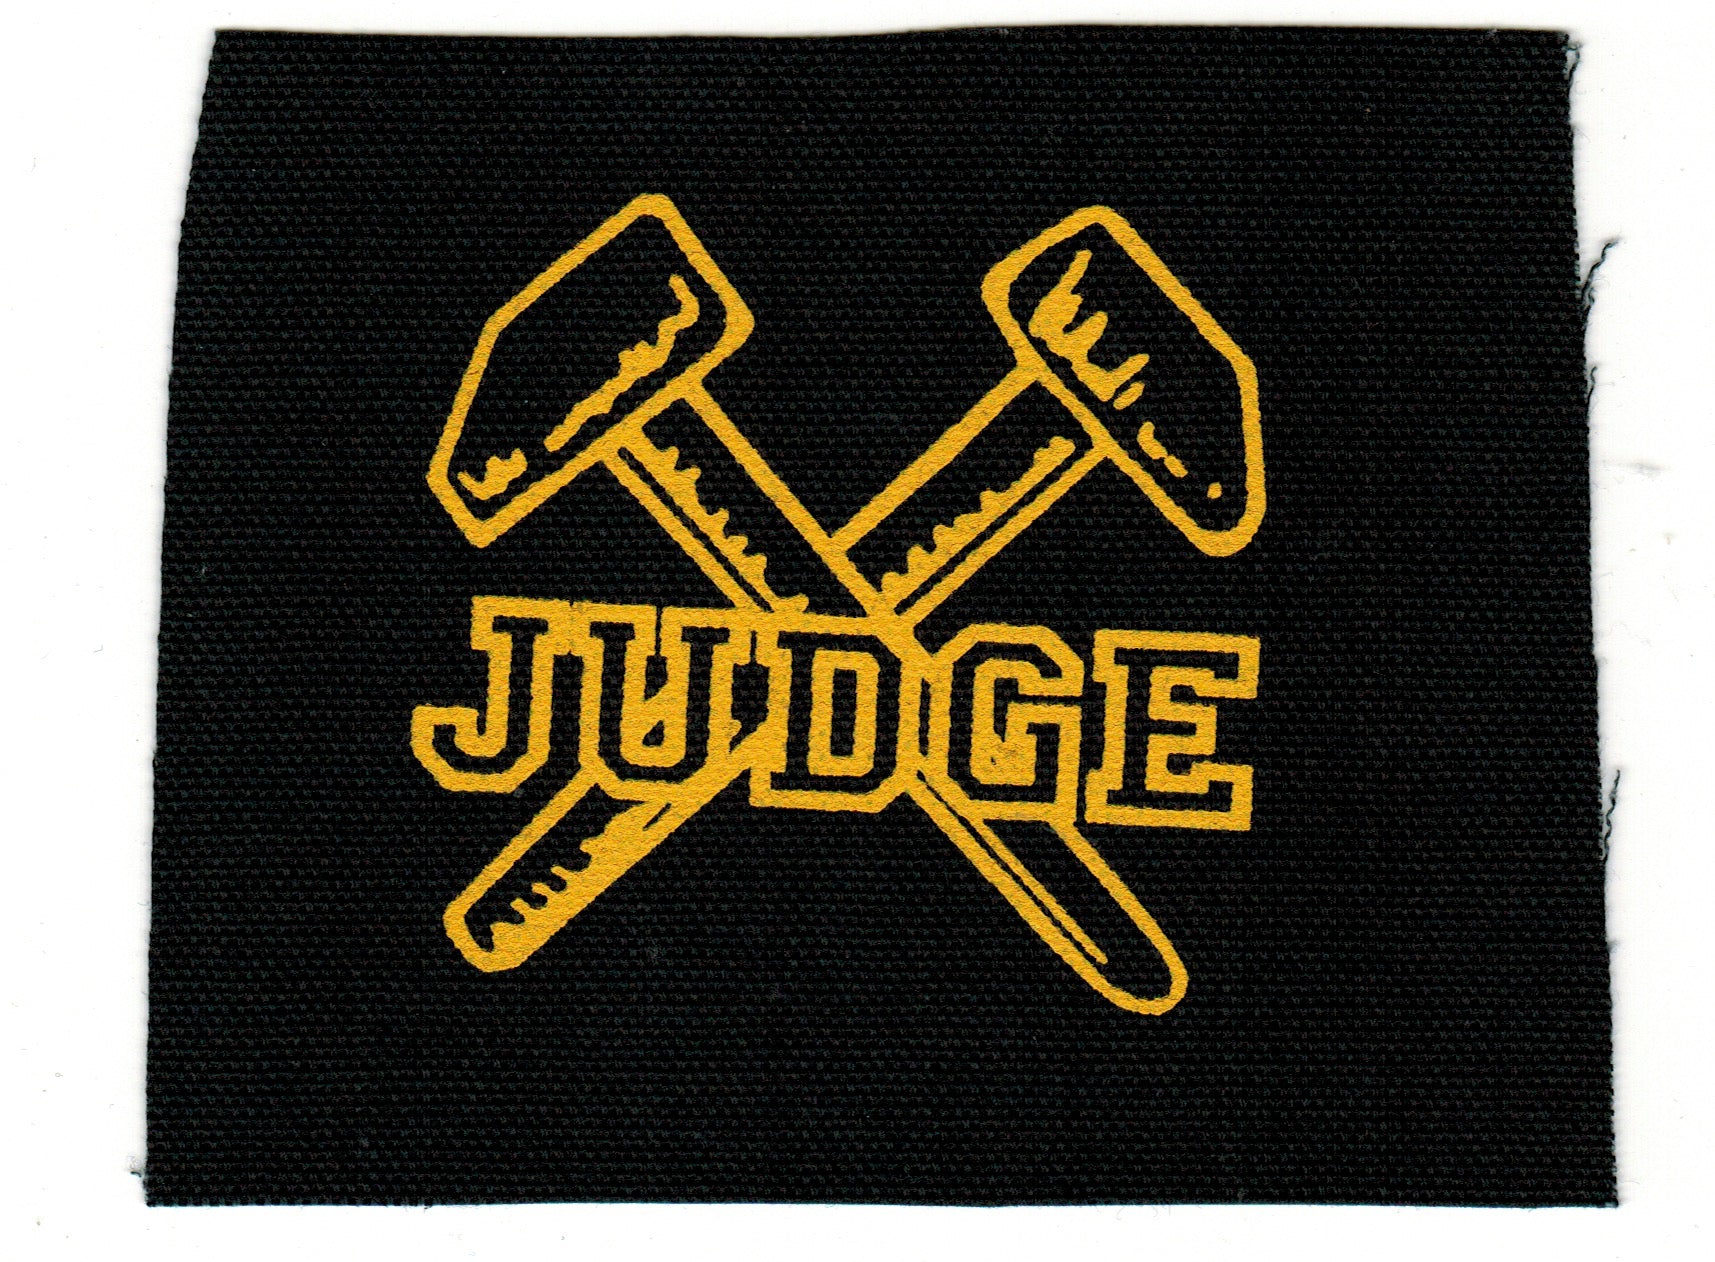 JUDGE 'Hammers' Screenprinted Patch